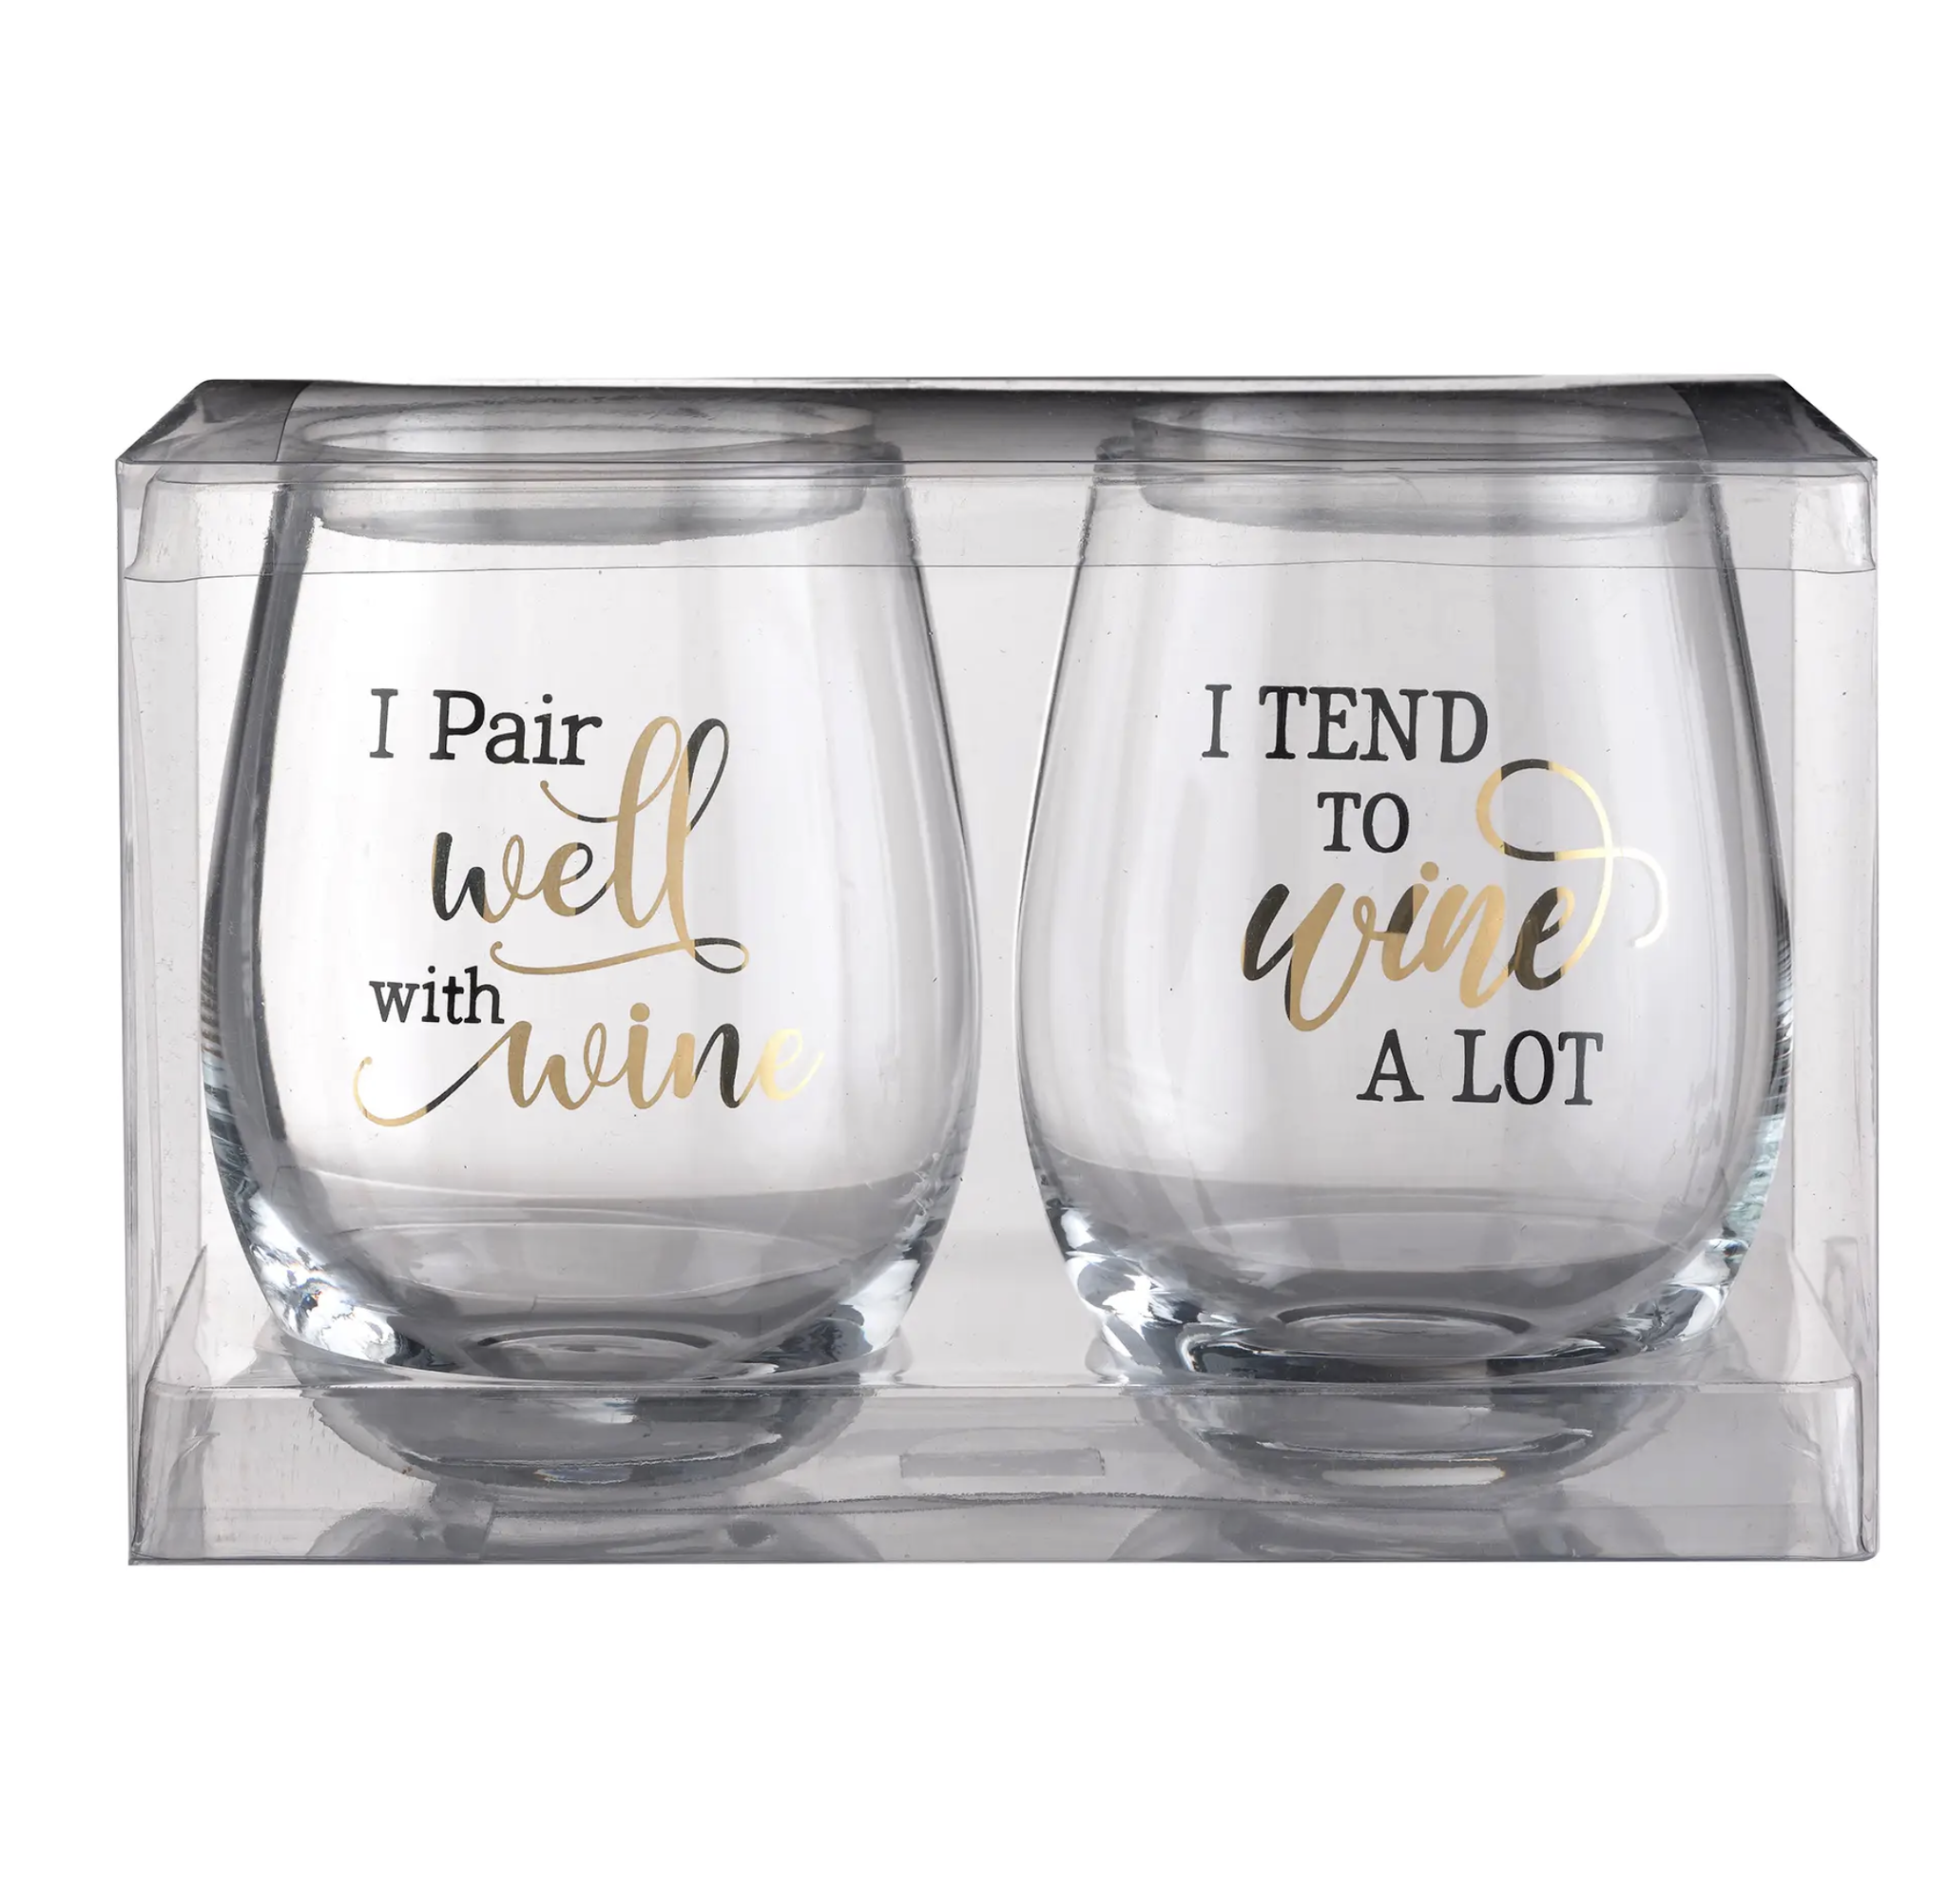 Vinglas Wine a lot & Pair well 2-pack